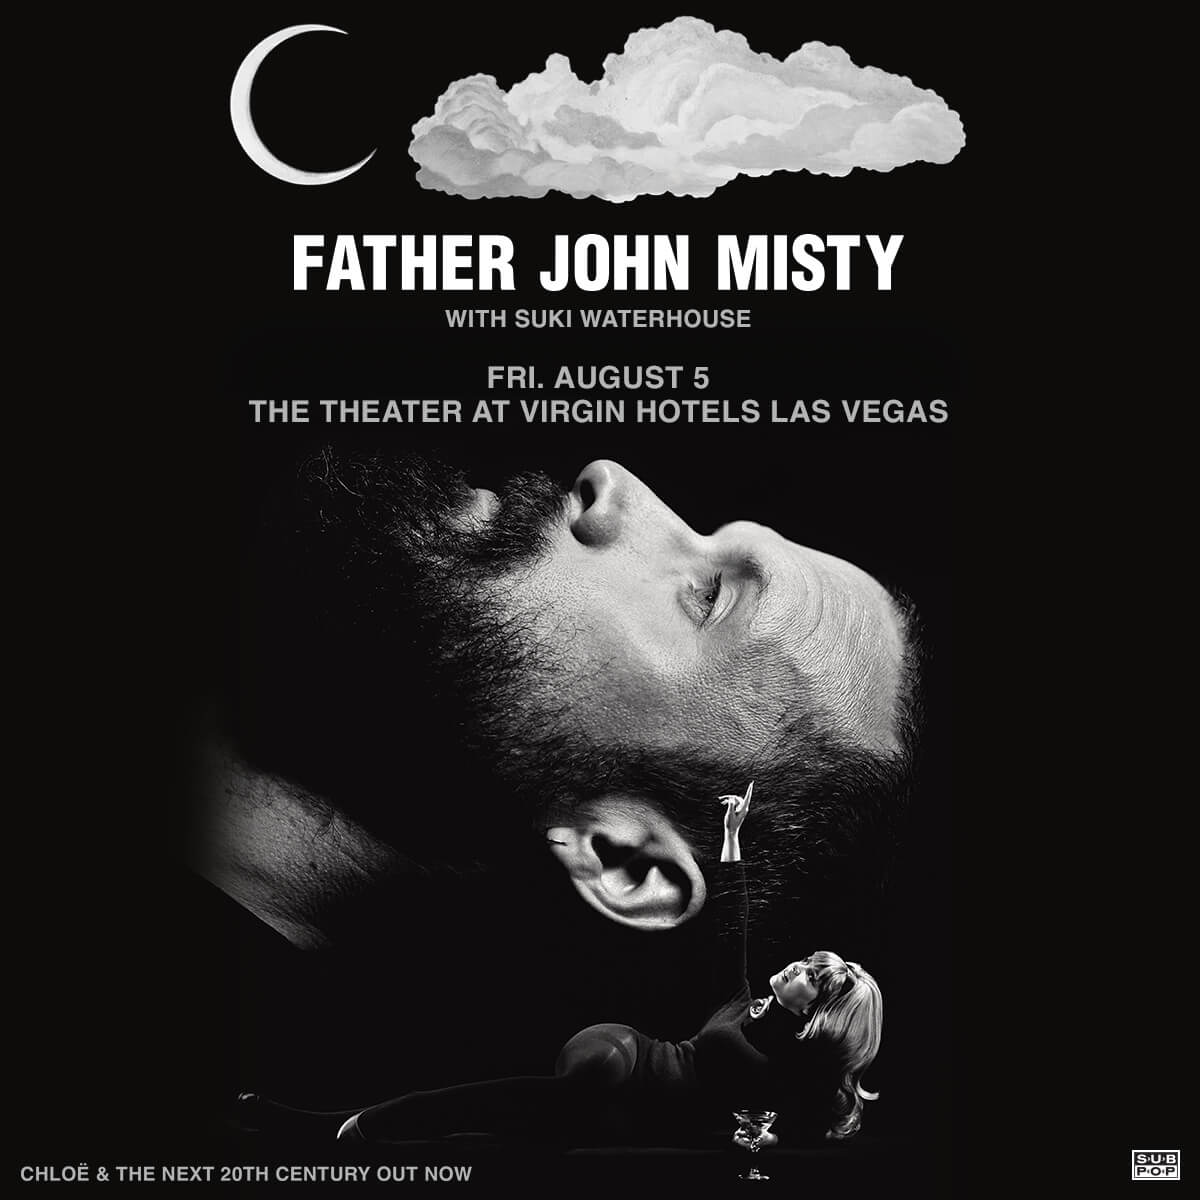 FATHER JOHN MISTYLive at The Theater at Virgin Hotels Las Vegas + Vinyl